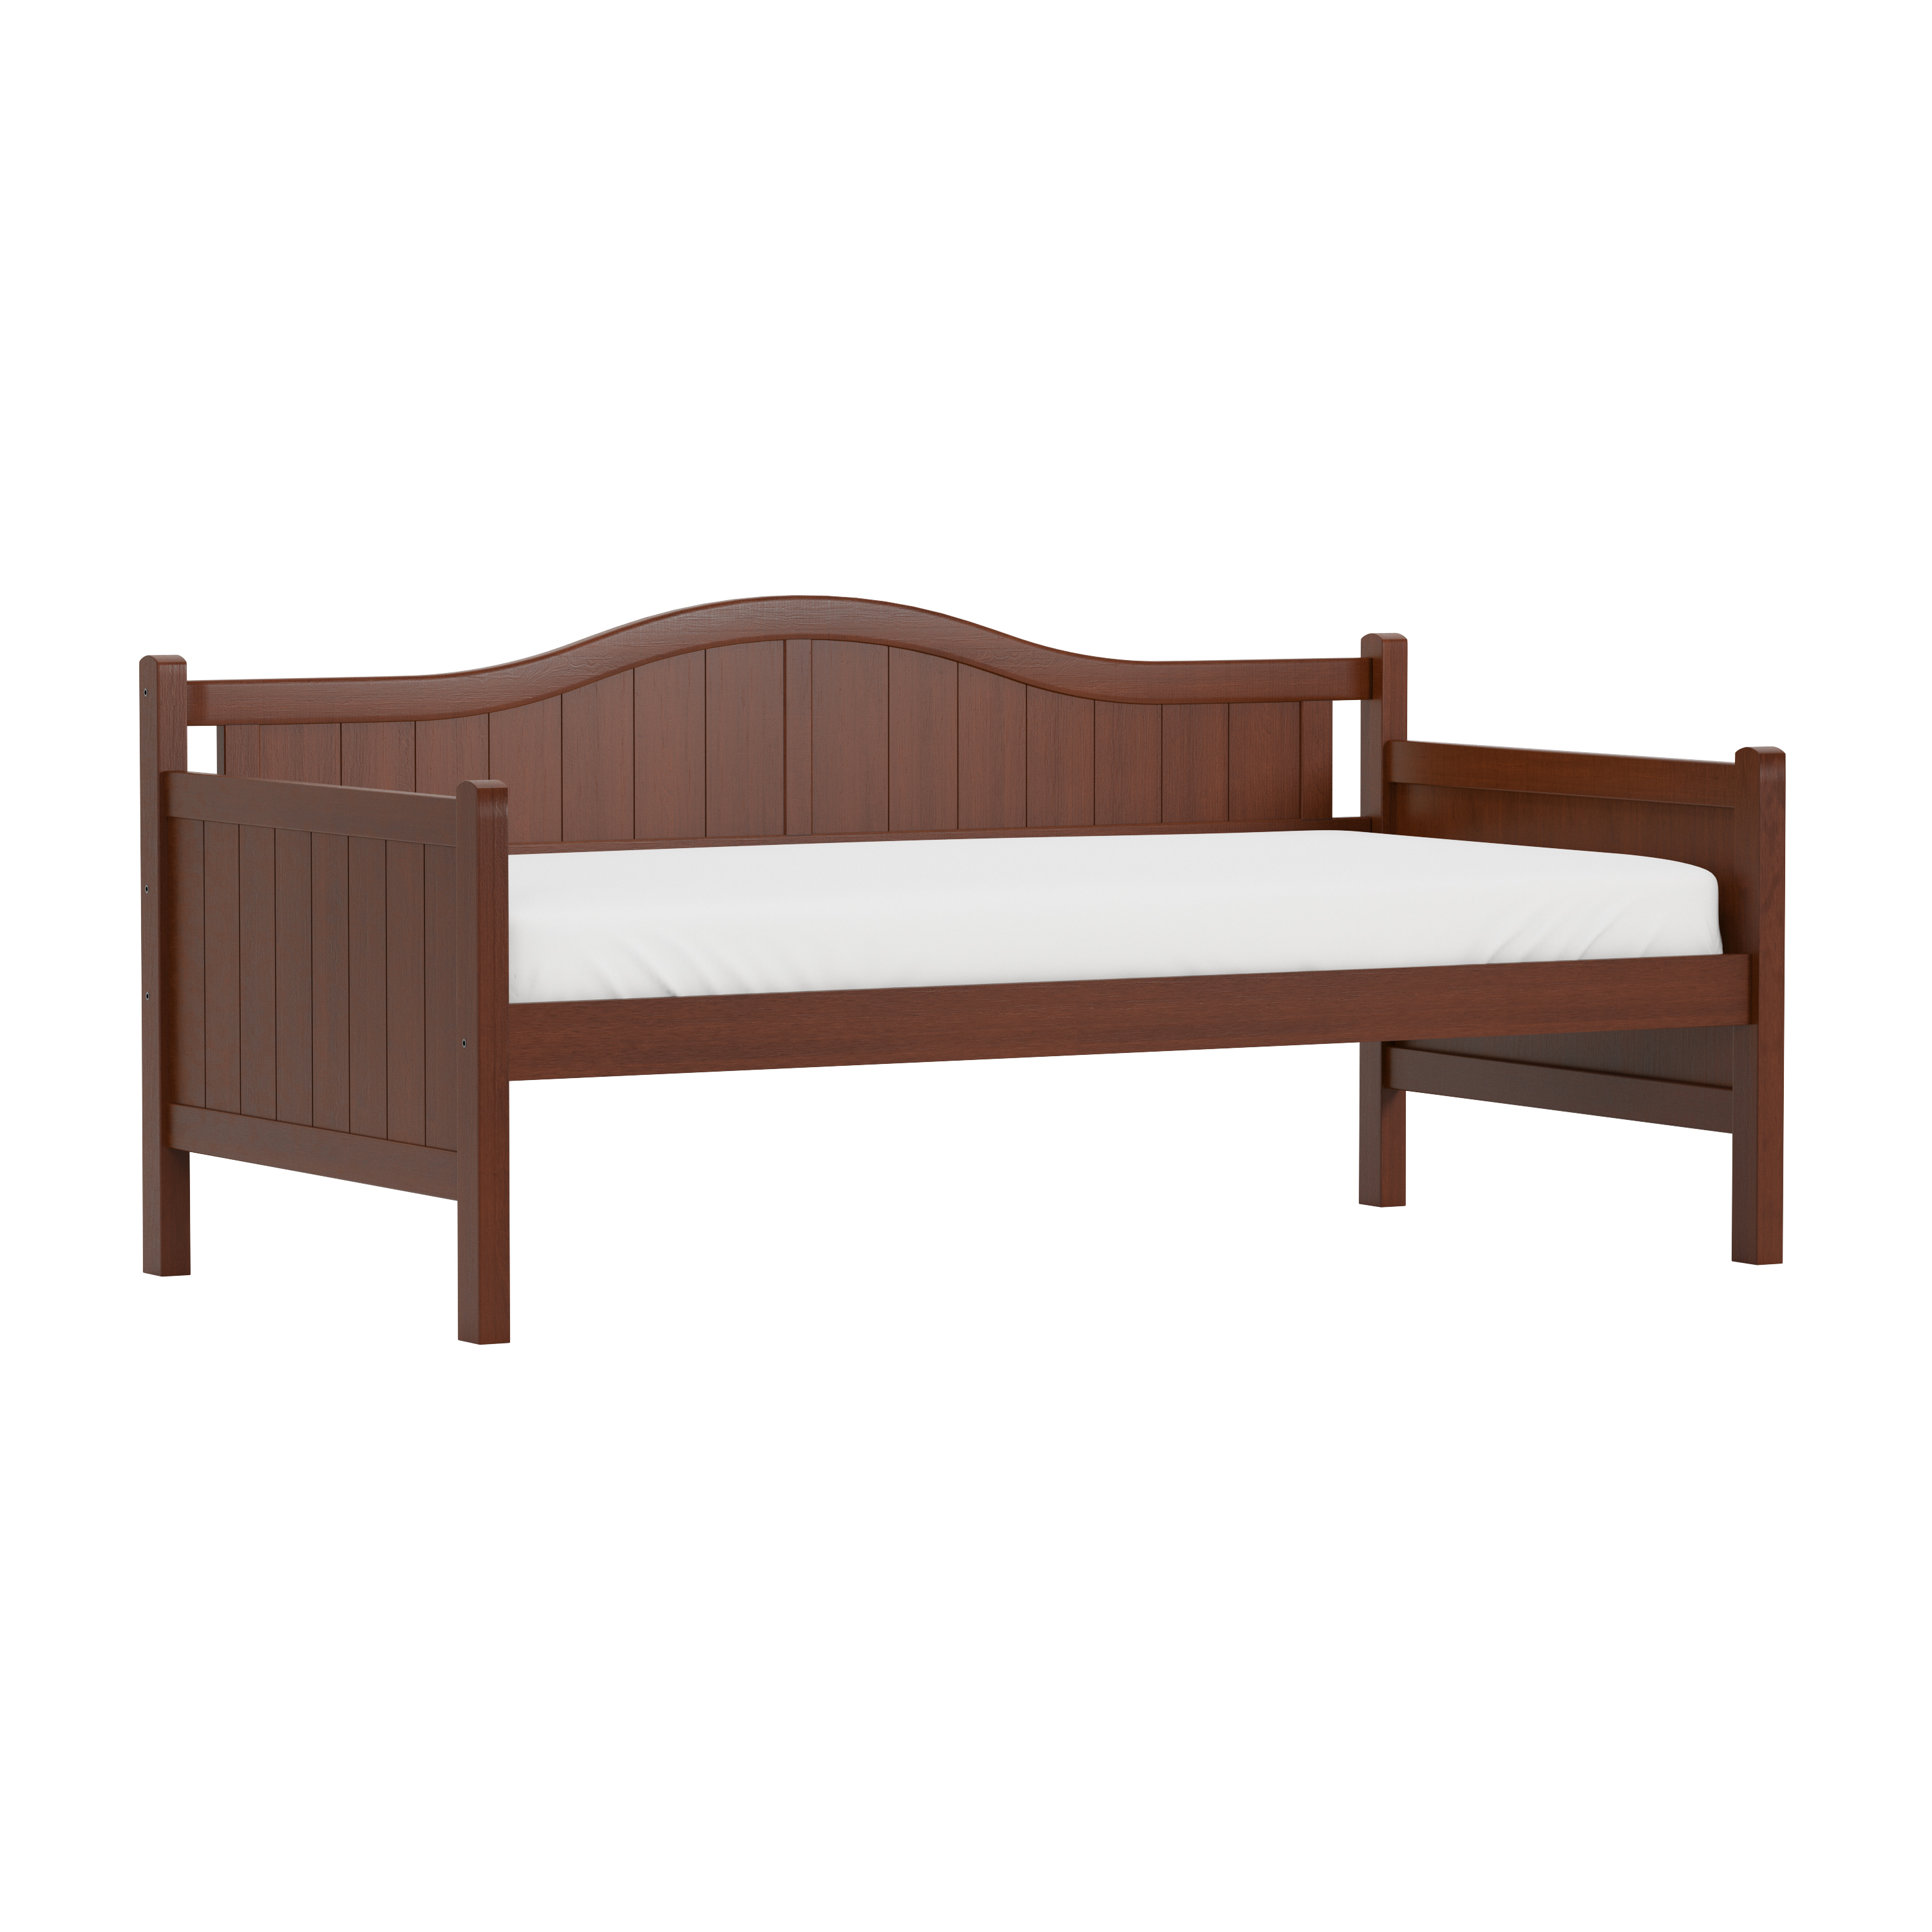 Staci Wood Daybed